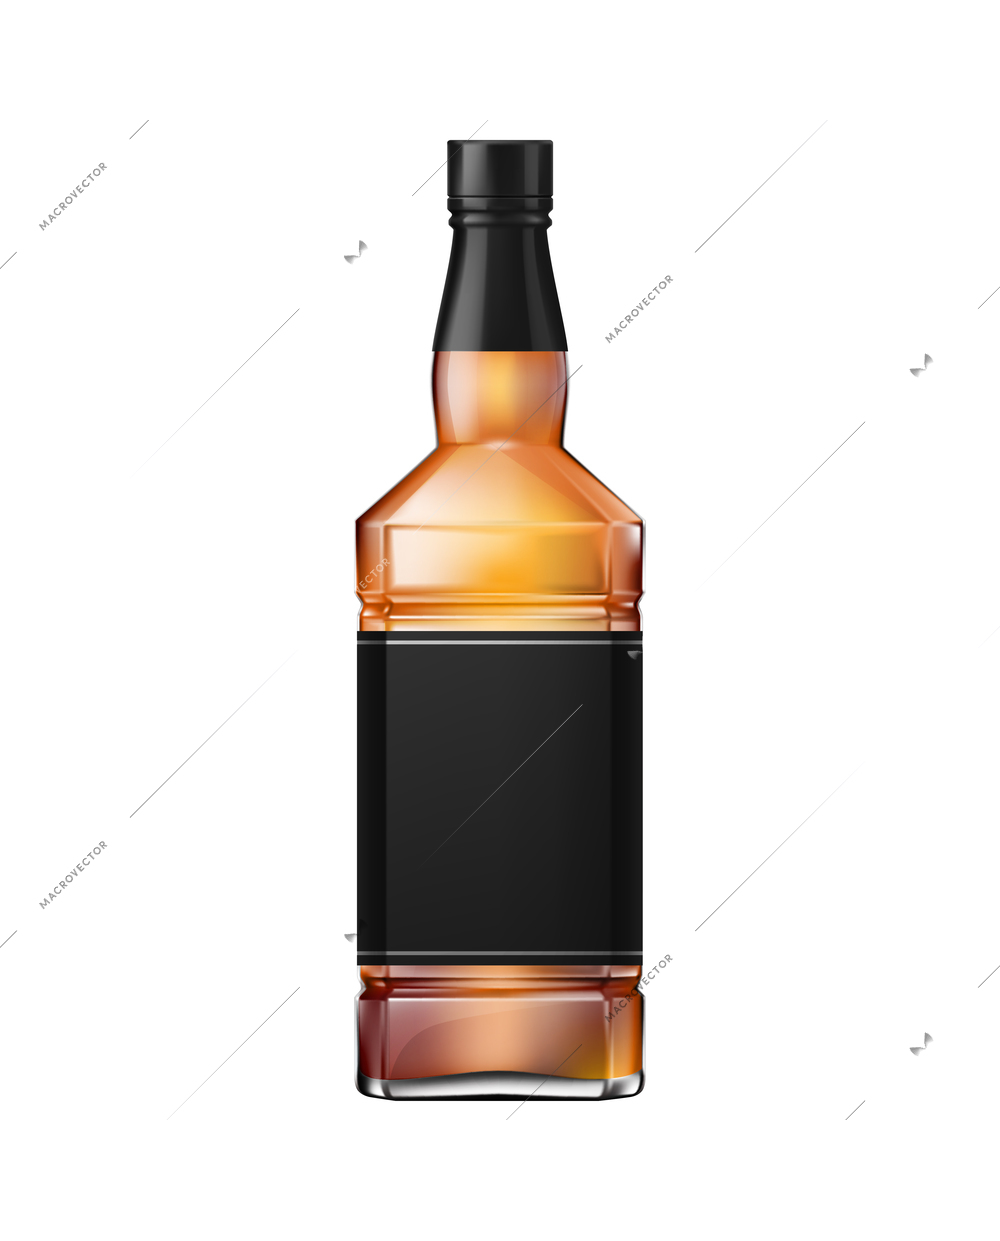 Whisky cognac or brandy bottle with black label and screw cap realistic vector illustration